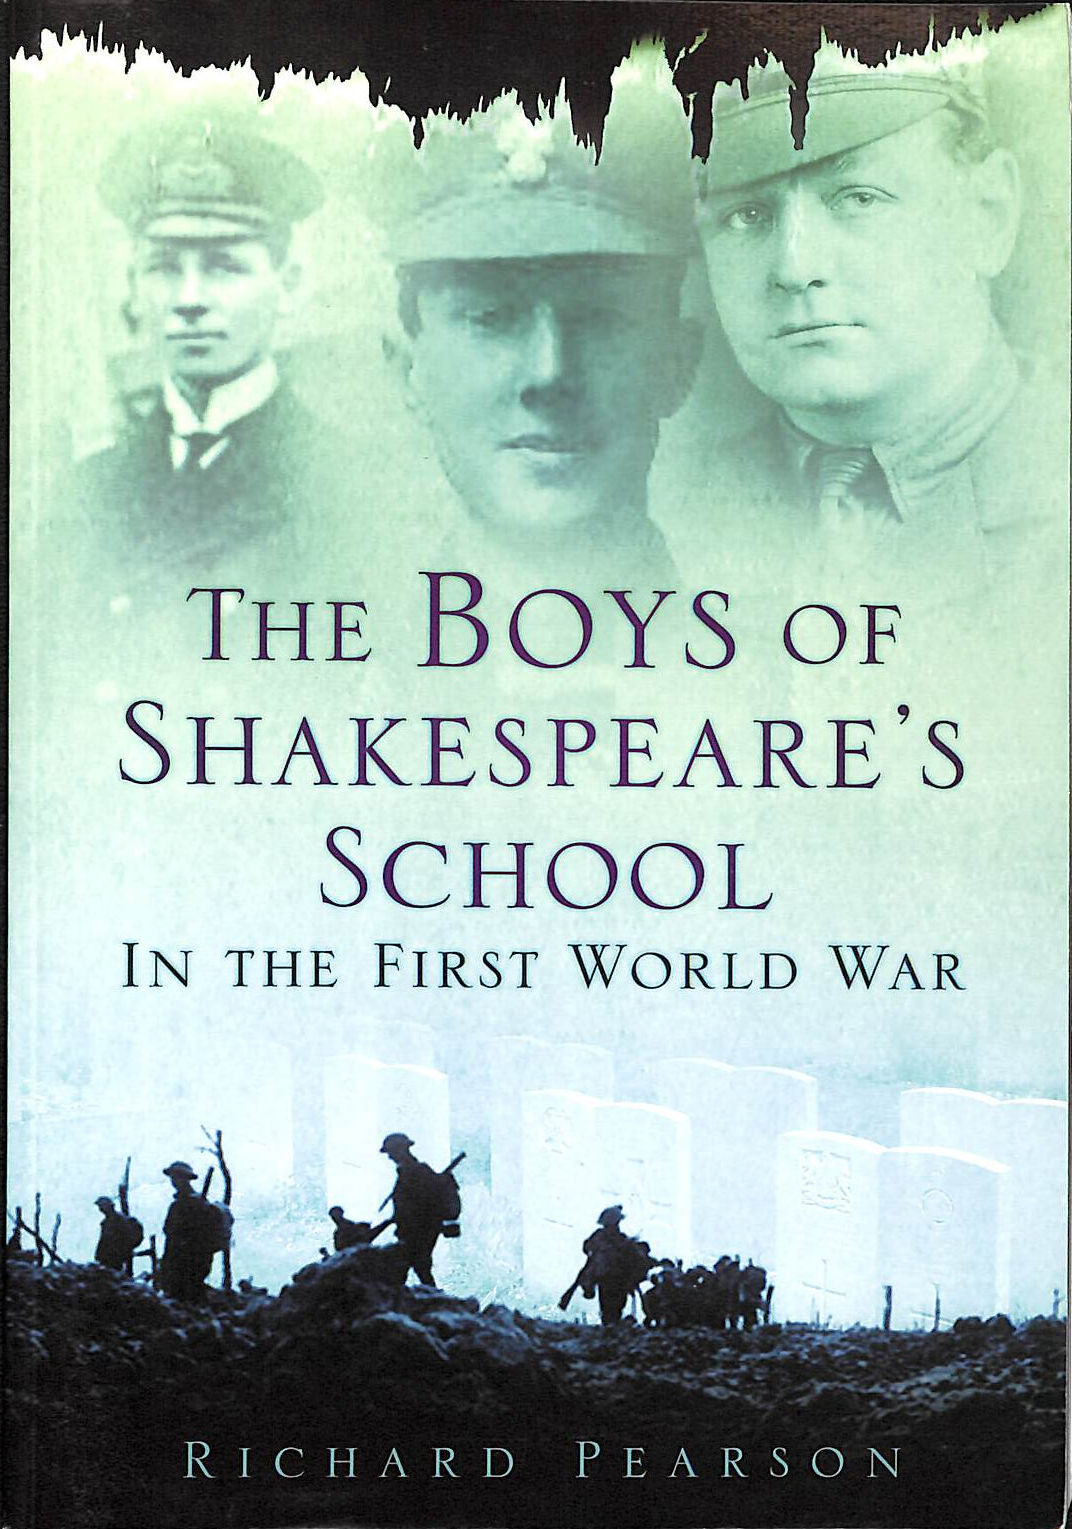 RICHARD, PEARSON - The Boys of Shakespeare's School in the First World War